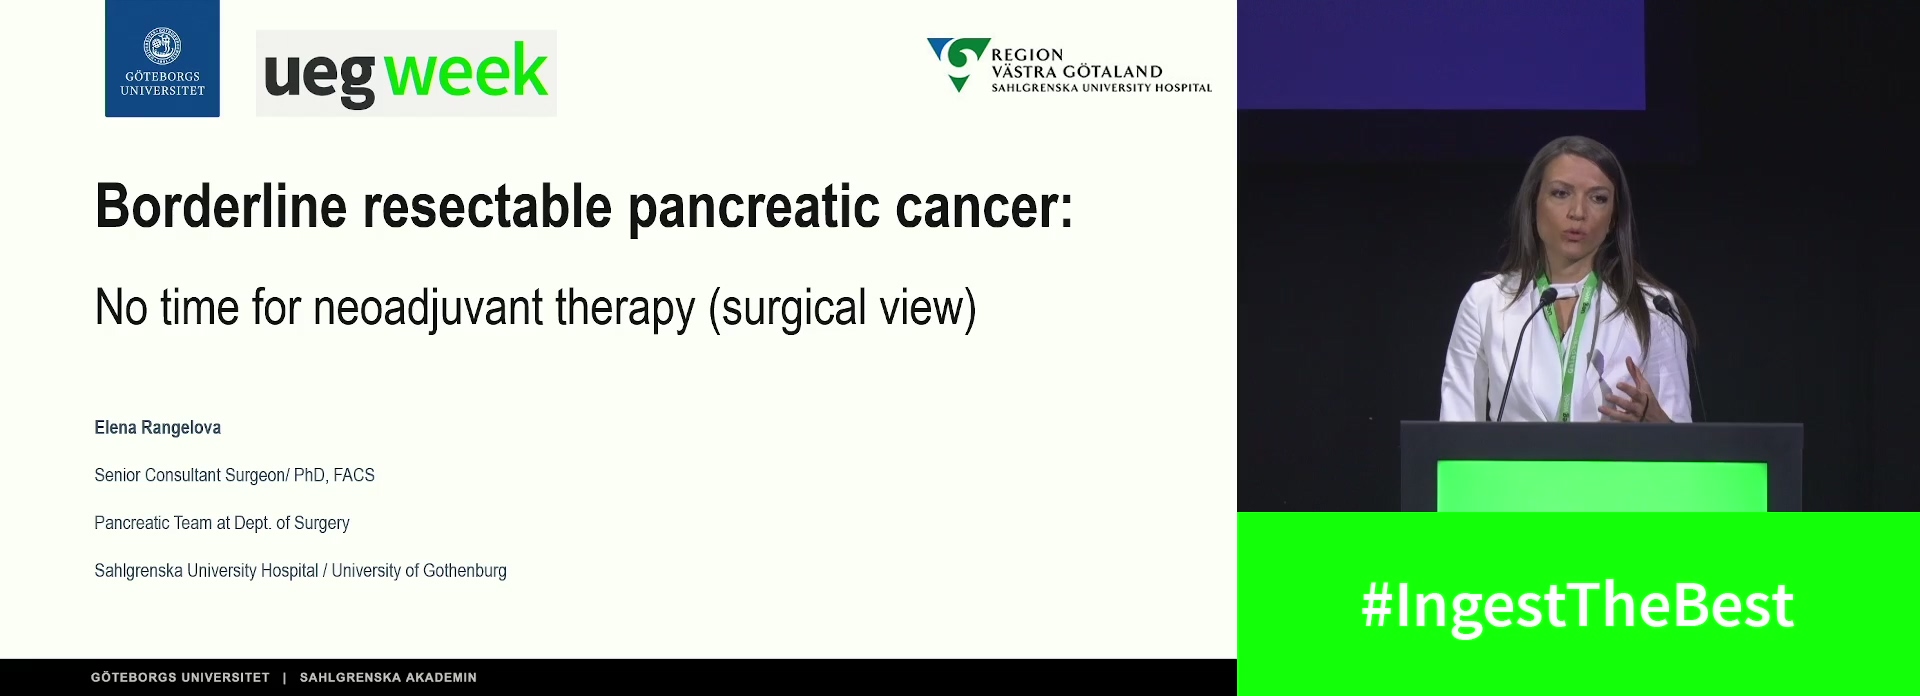 Borderline resectable pancreatic cancer: No time for neoadjuvant treatment (surgical view) / Prime time for neoadjuvant treatment (oncologist view)